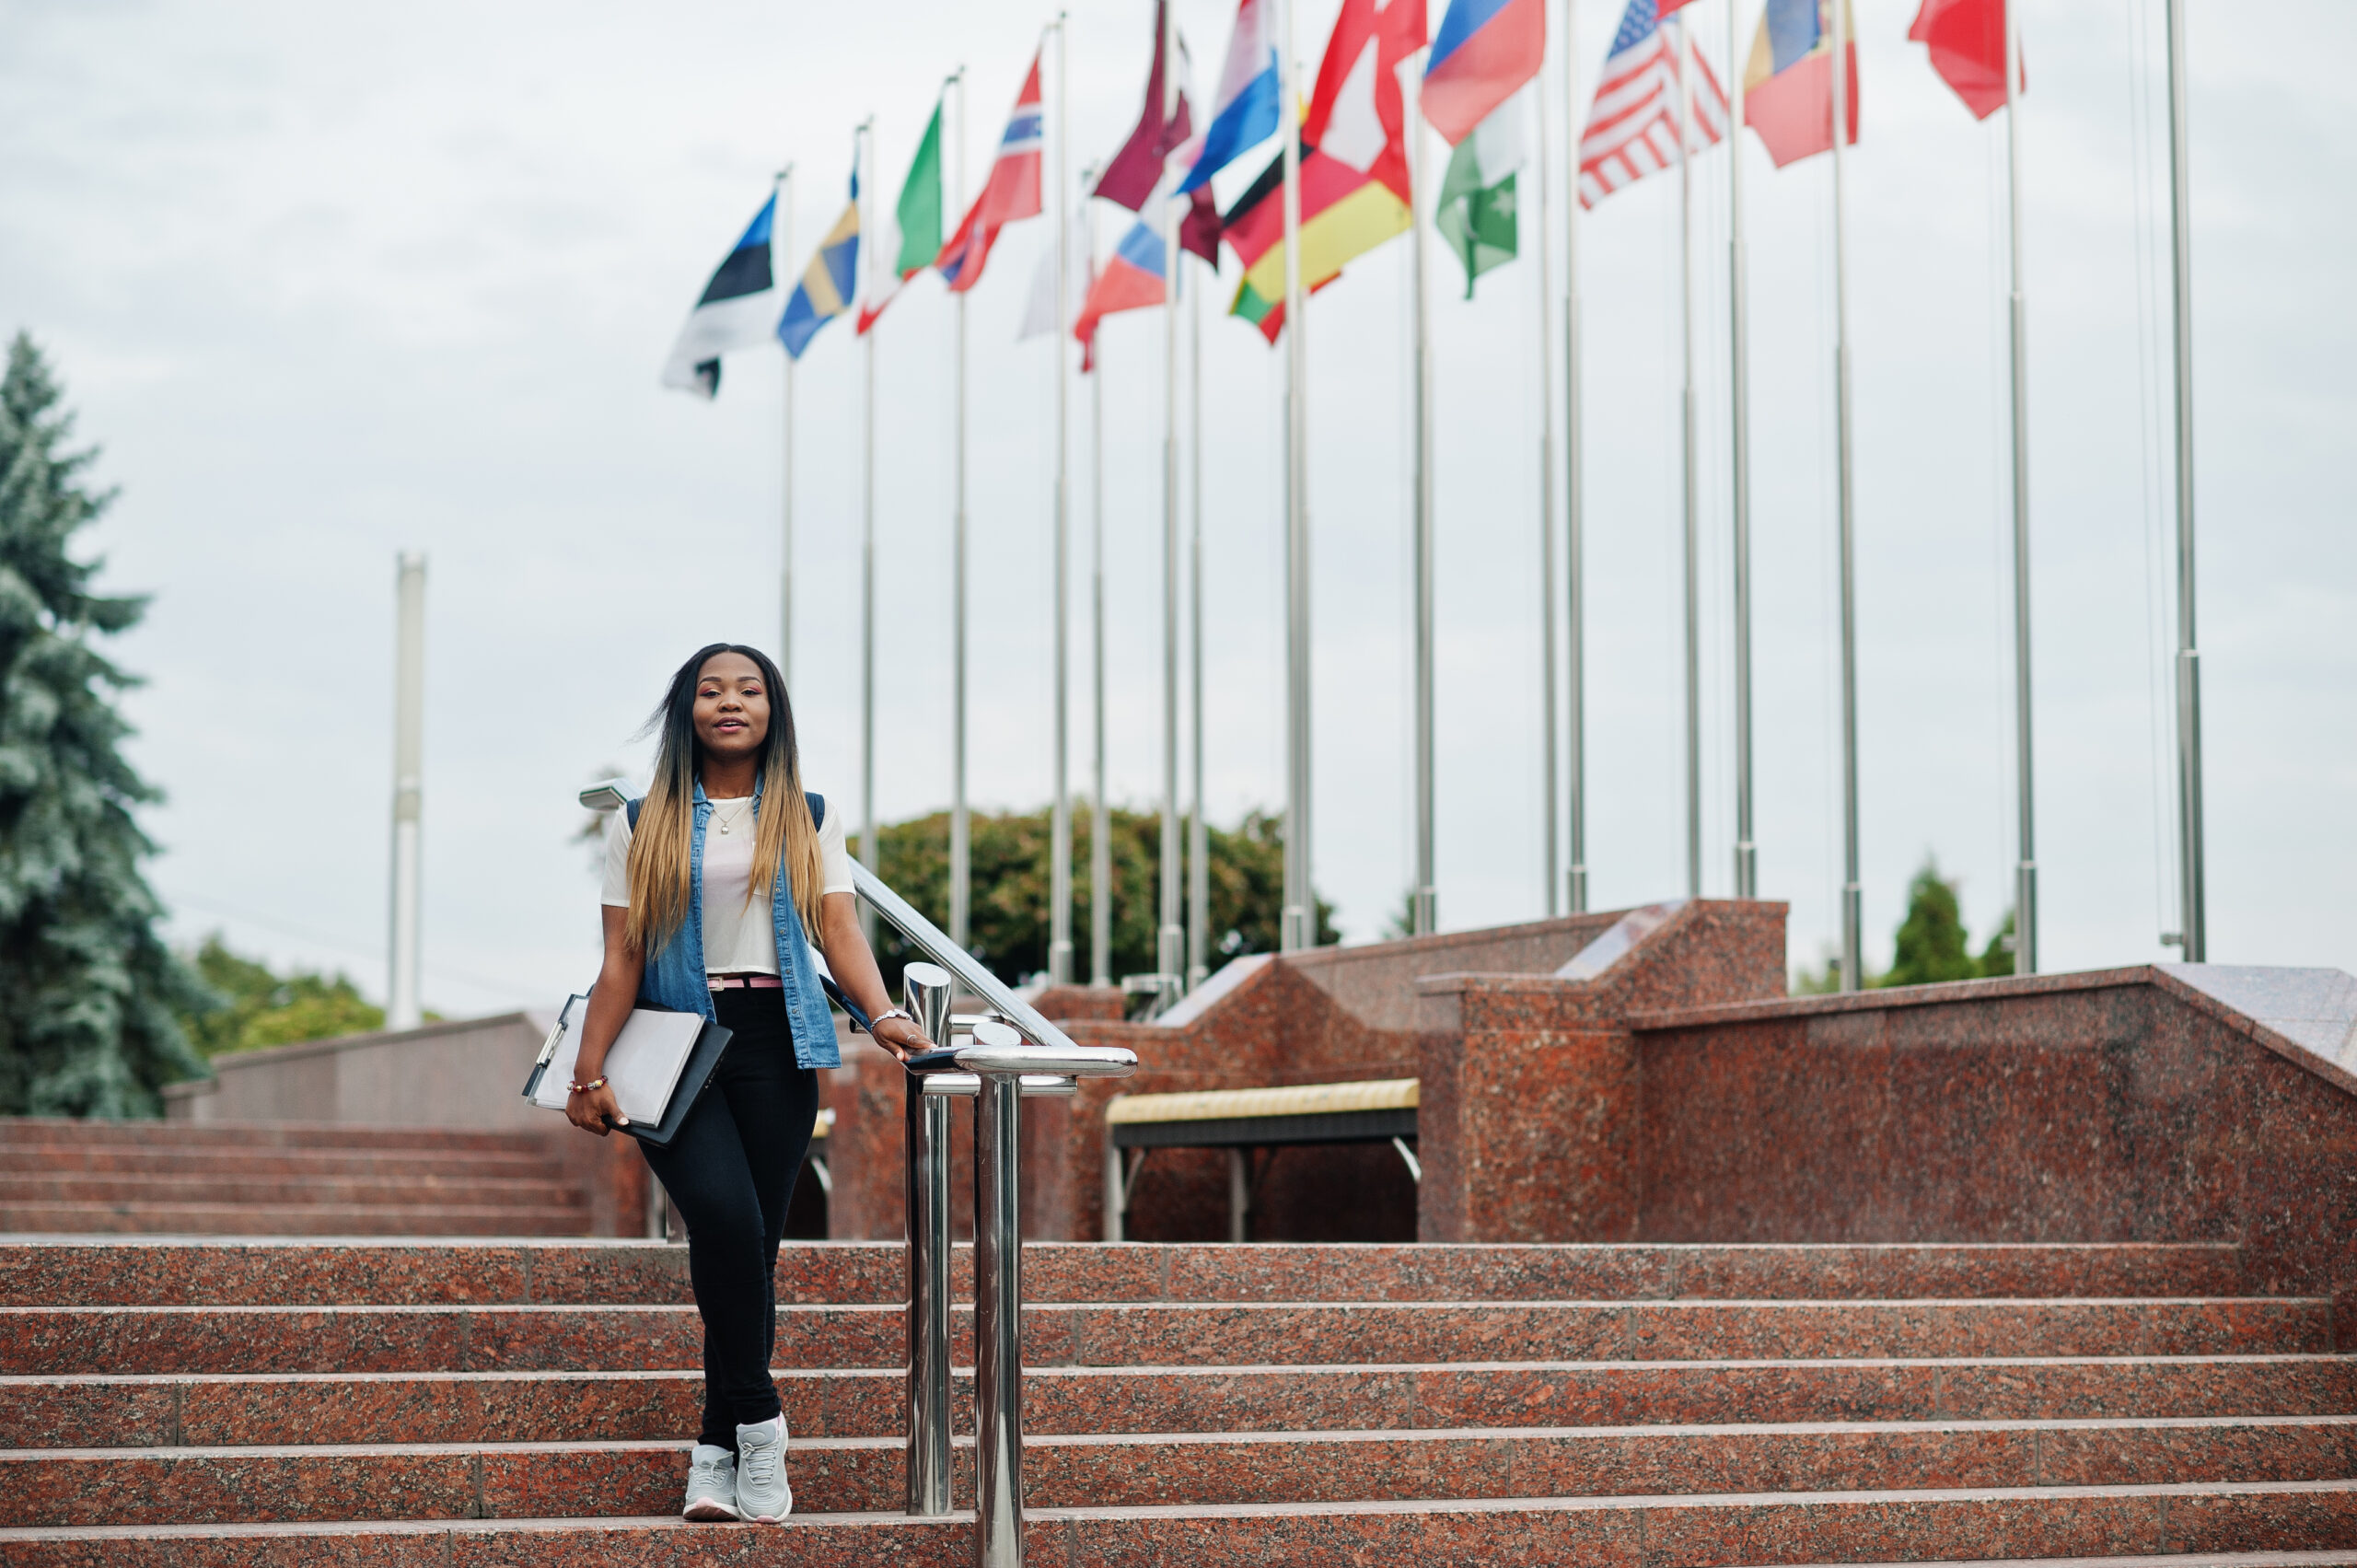 CHALLENGES INTERNATIONAL STUDENTS IN THE UK FACE AND HOW TO OVERCOME THEM